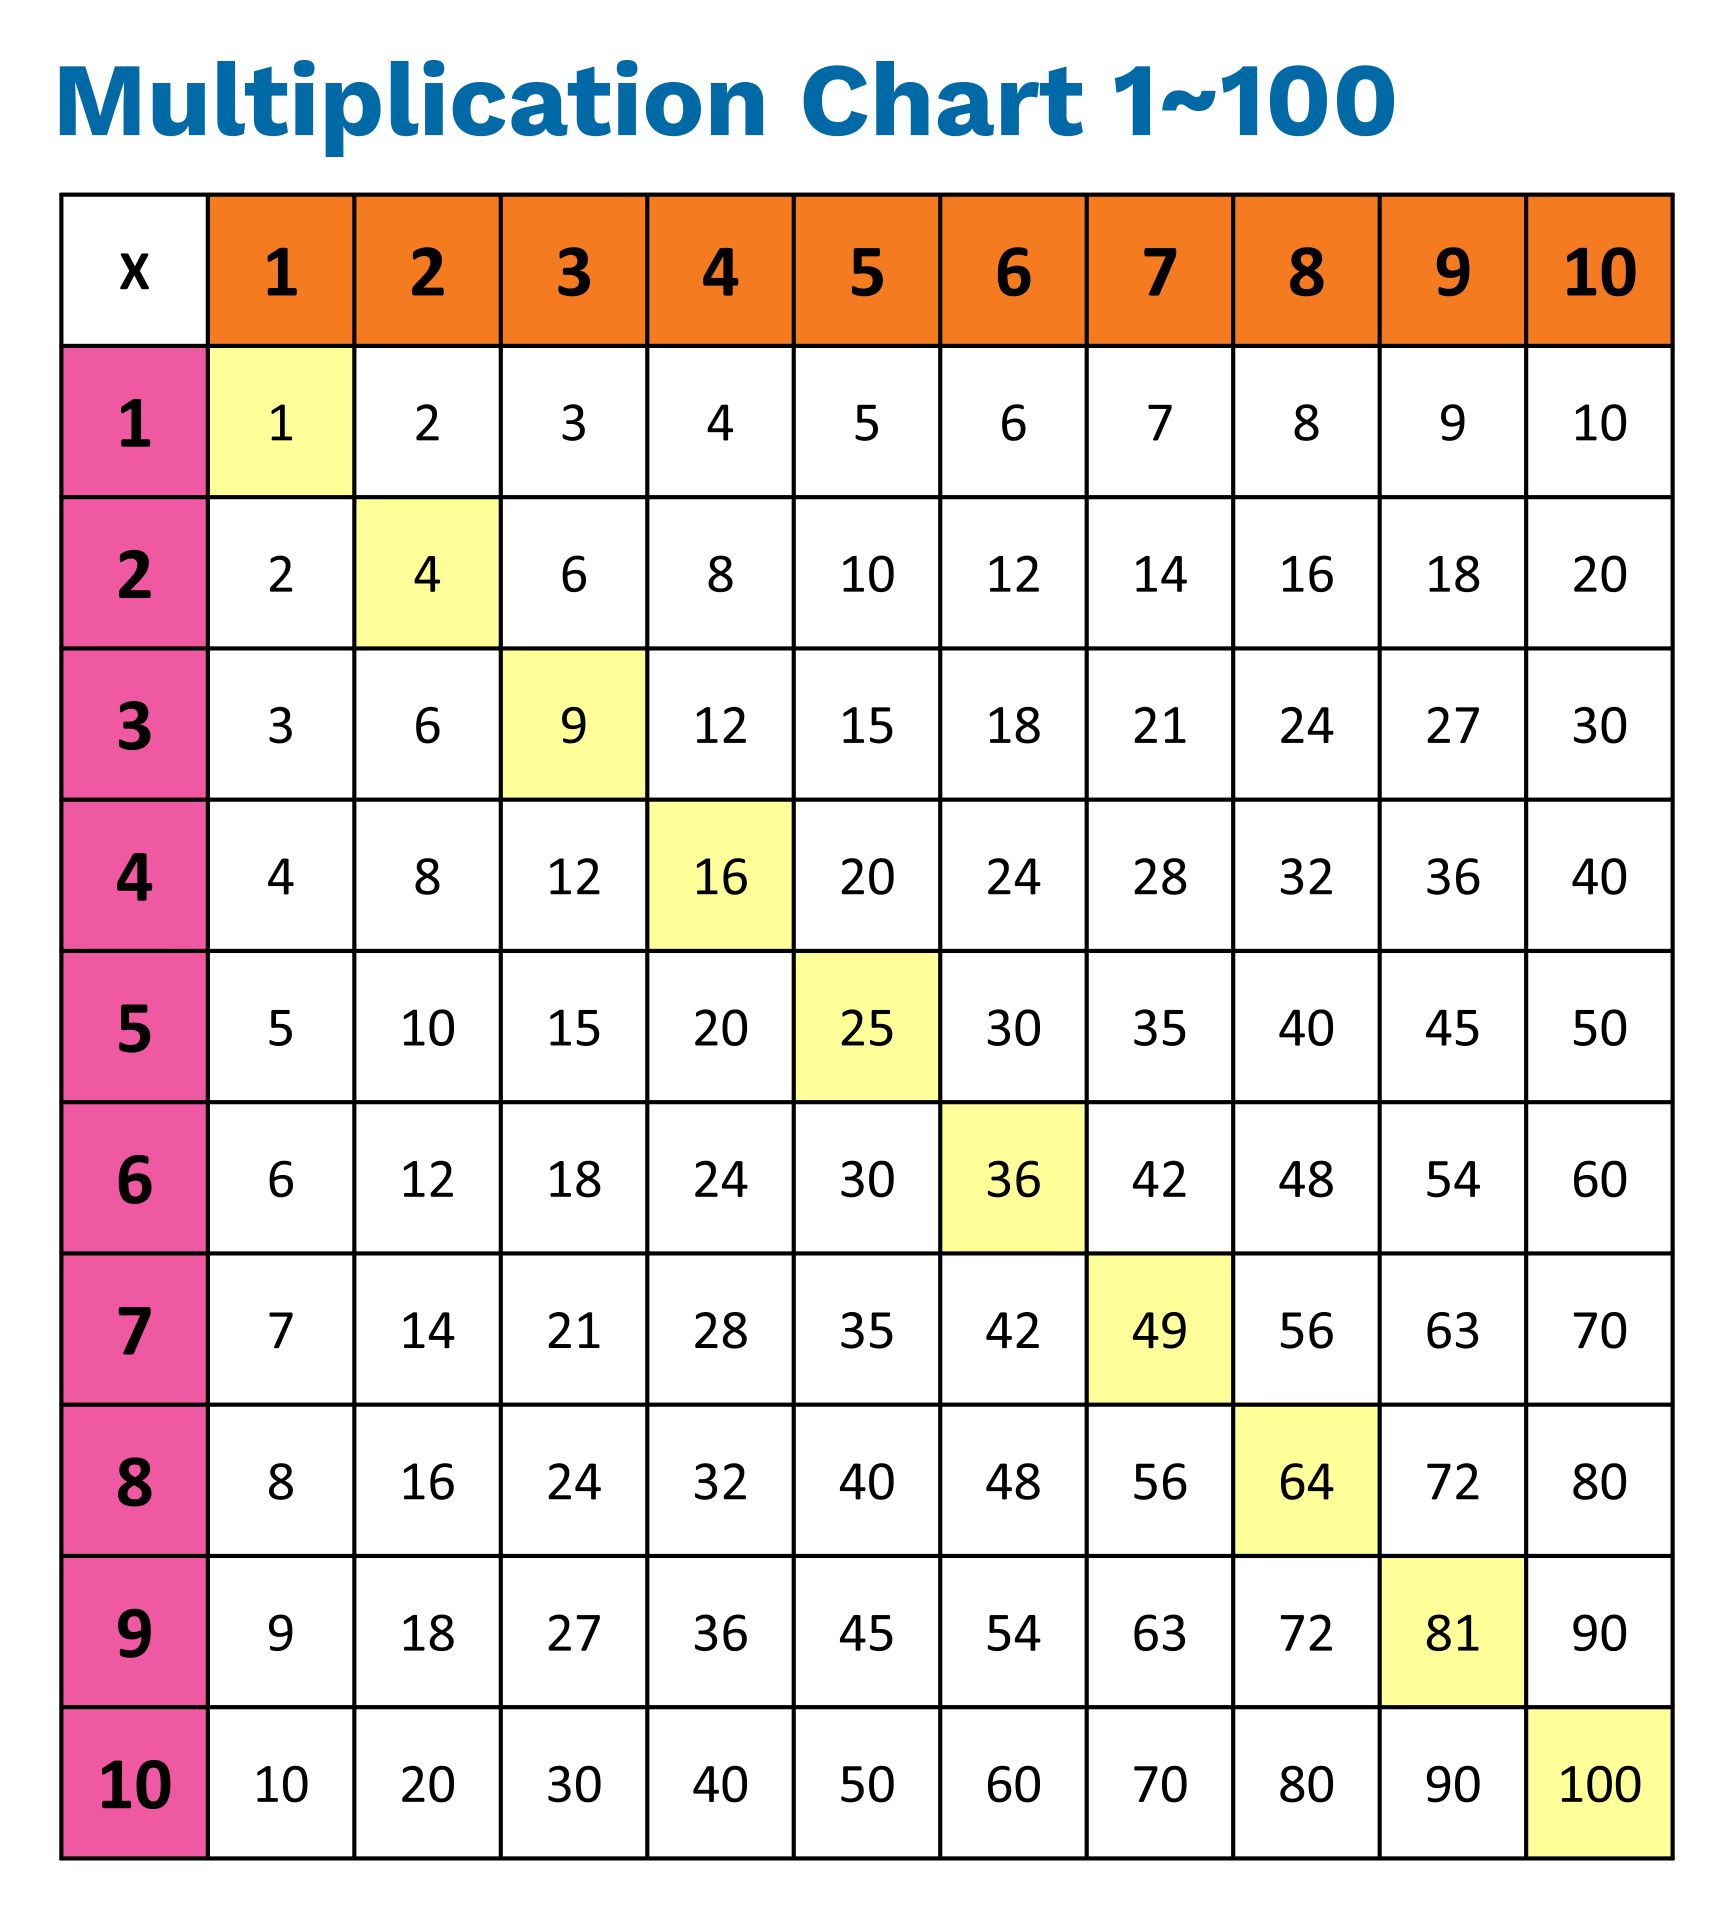 Multiplication Number Chart 1 to 100